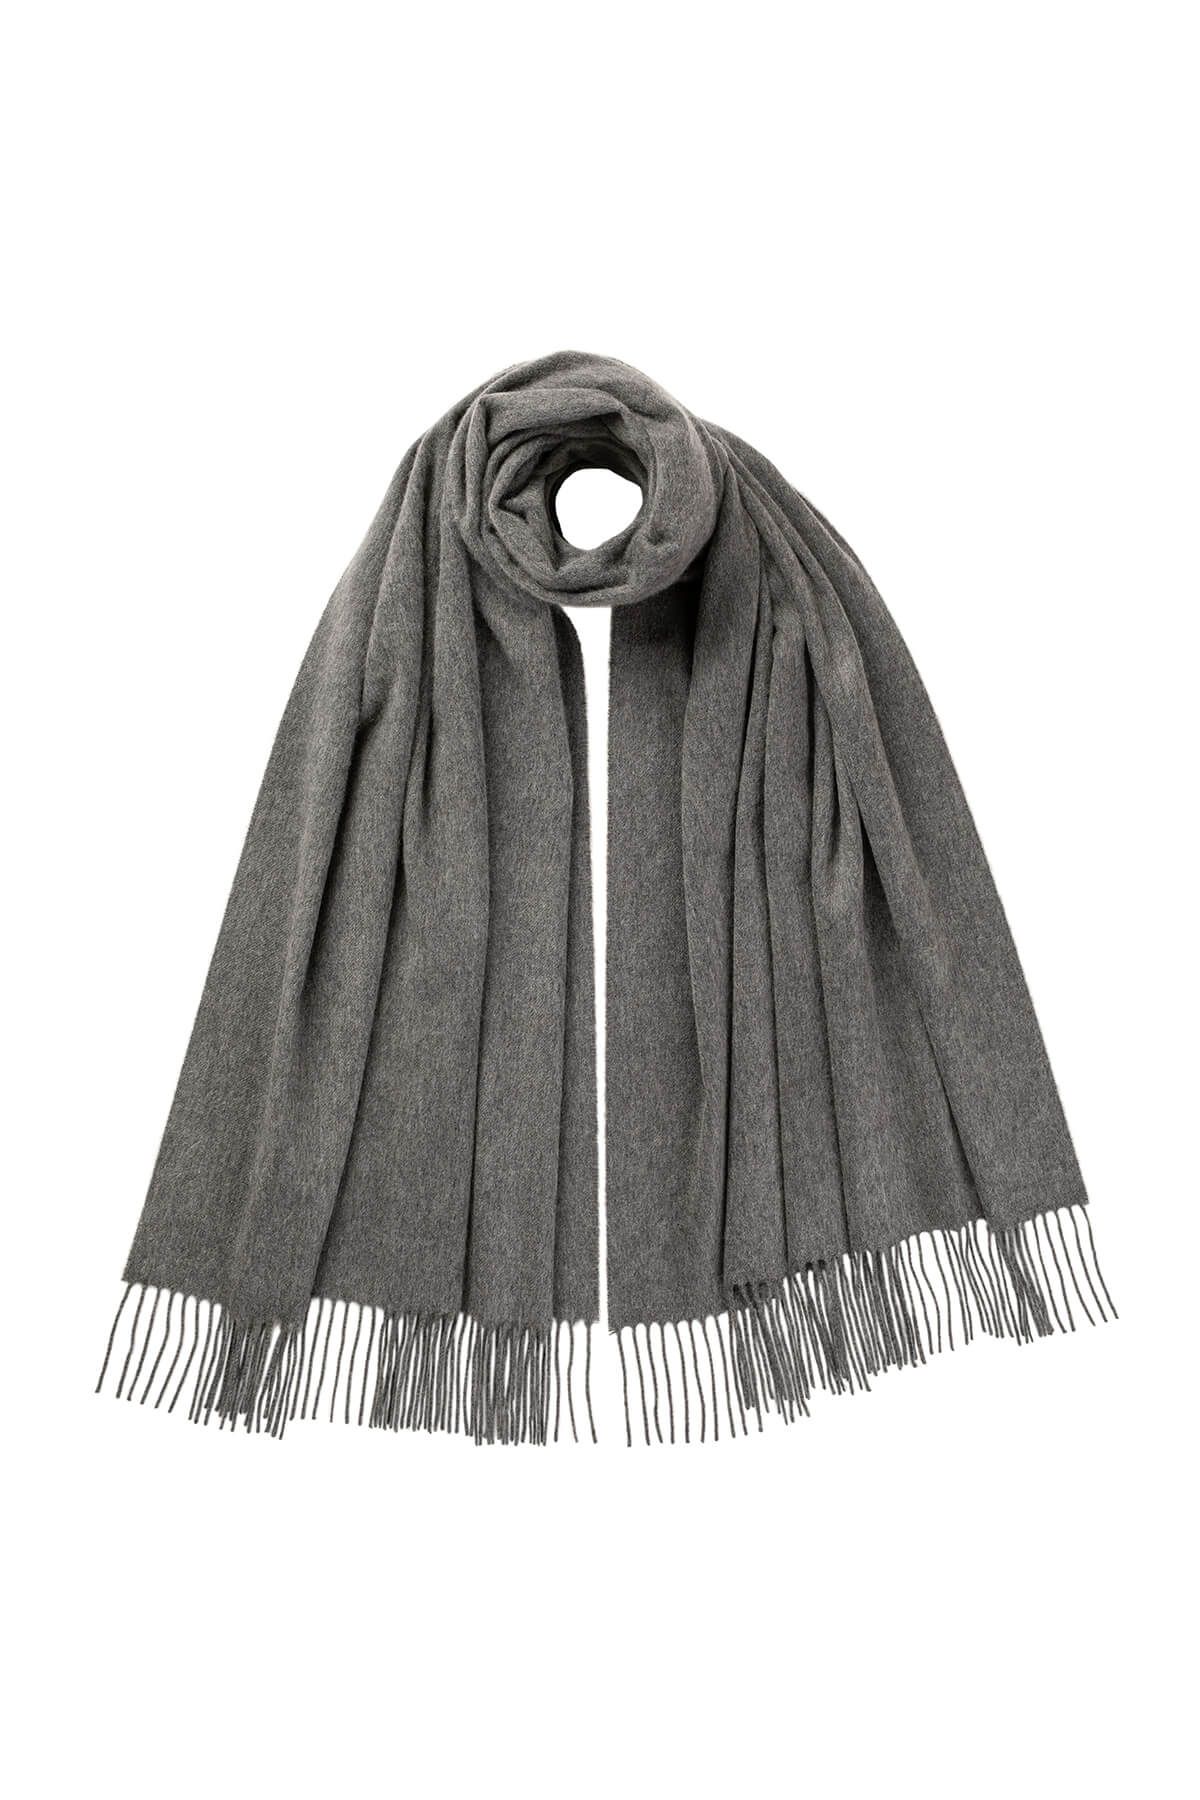 Johnstons of Elgin 100% Cashmere Stole in Mid Grey on a white background WA000056HA0501N/A